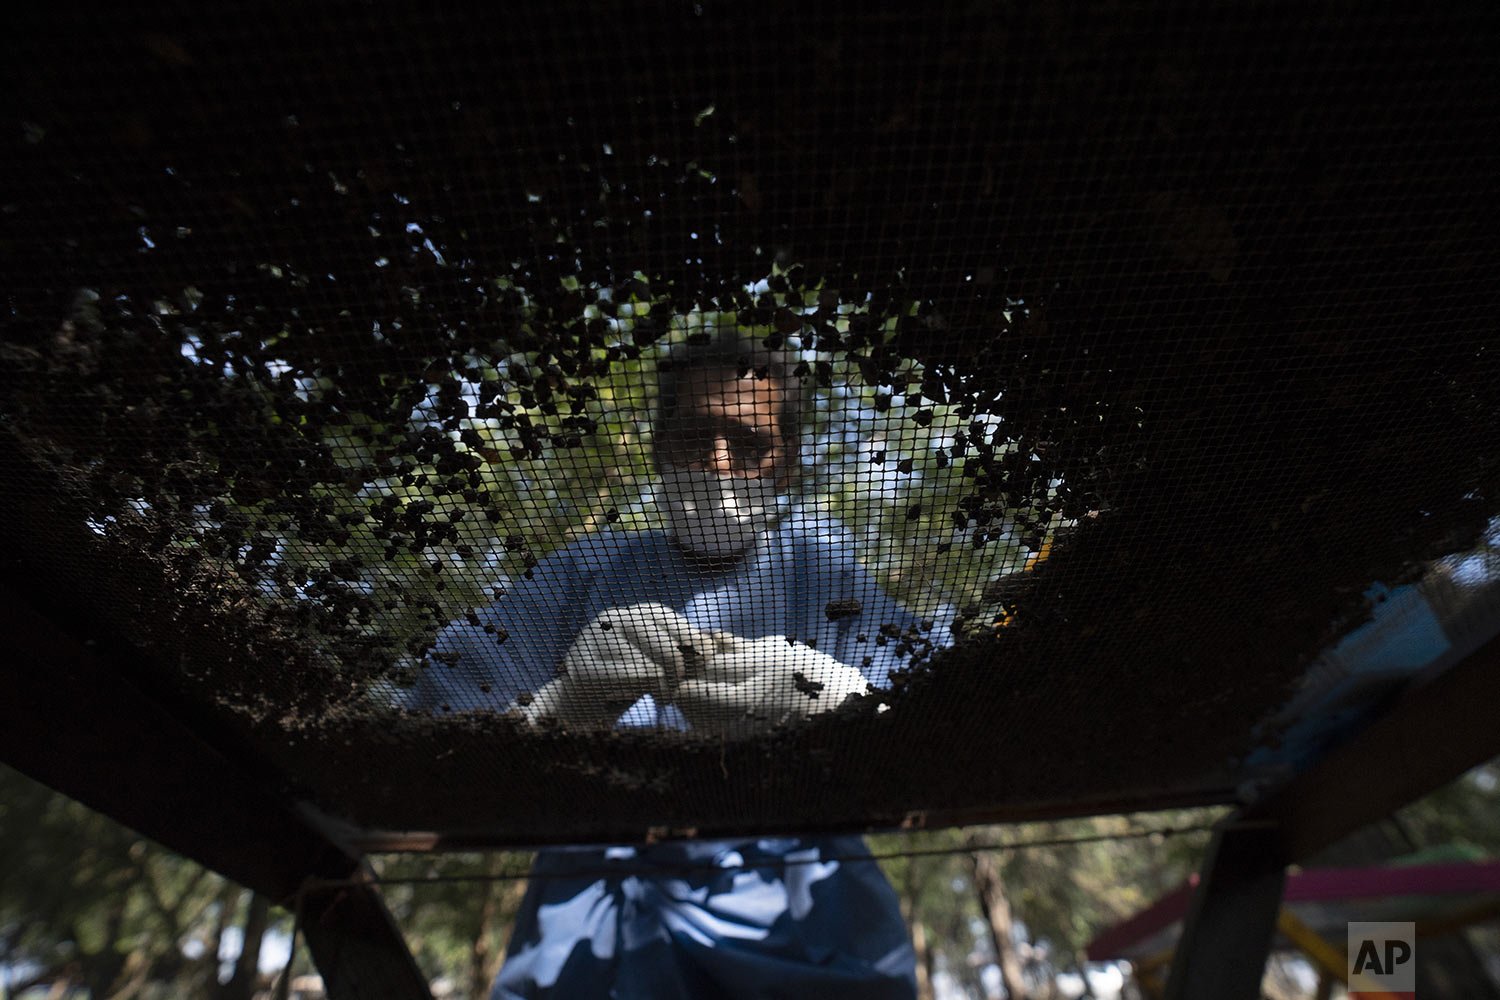  Alejandro Lopez, part of a collective of relatives who search for disappeared people, sifts through dirt taken from a clandestine grave in a field on the outskirts of Ciudad Mante, Mexico, Feb. 1, 2022. Most extermination sites in Mexico have been f